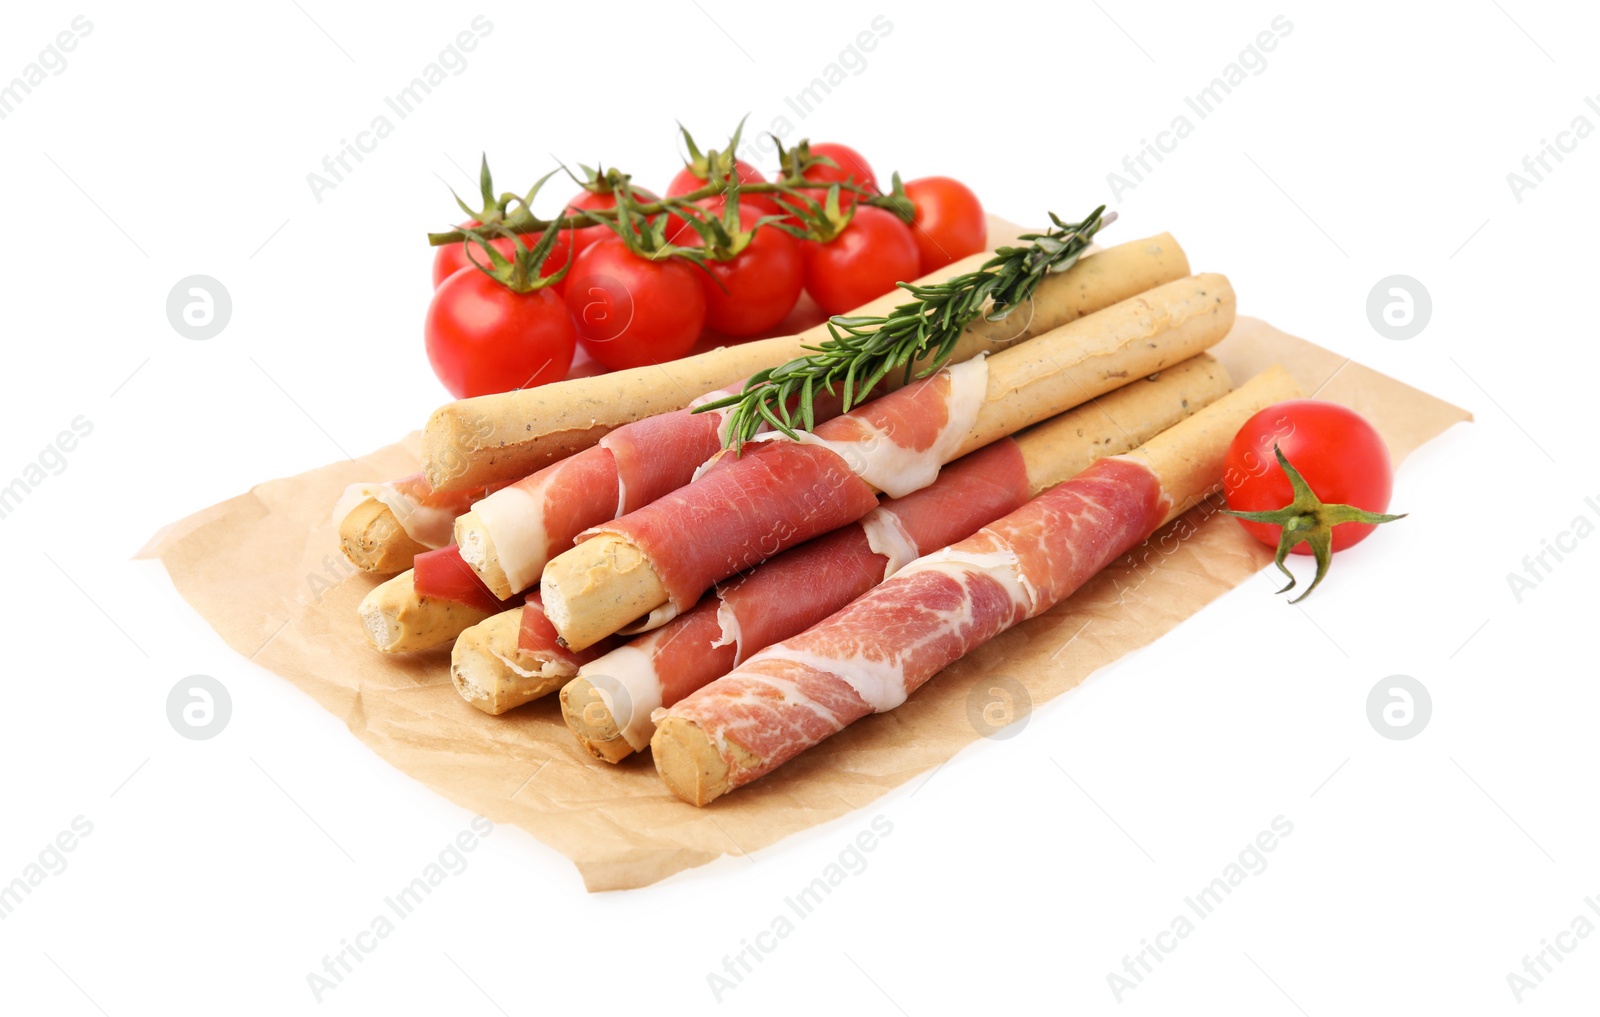 Photo of Delicious grissini sticks with prosciutto, tomatoes and rosemary on white background